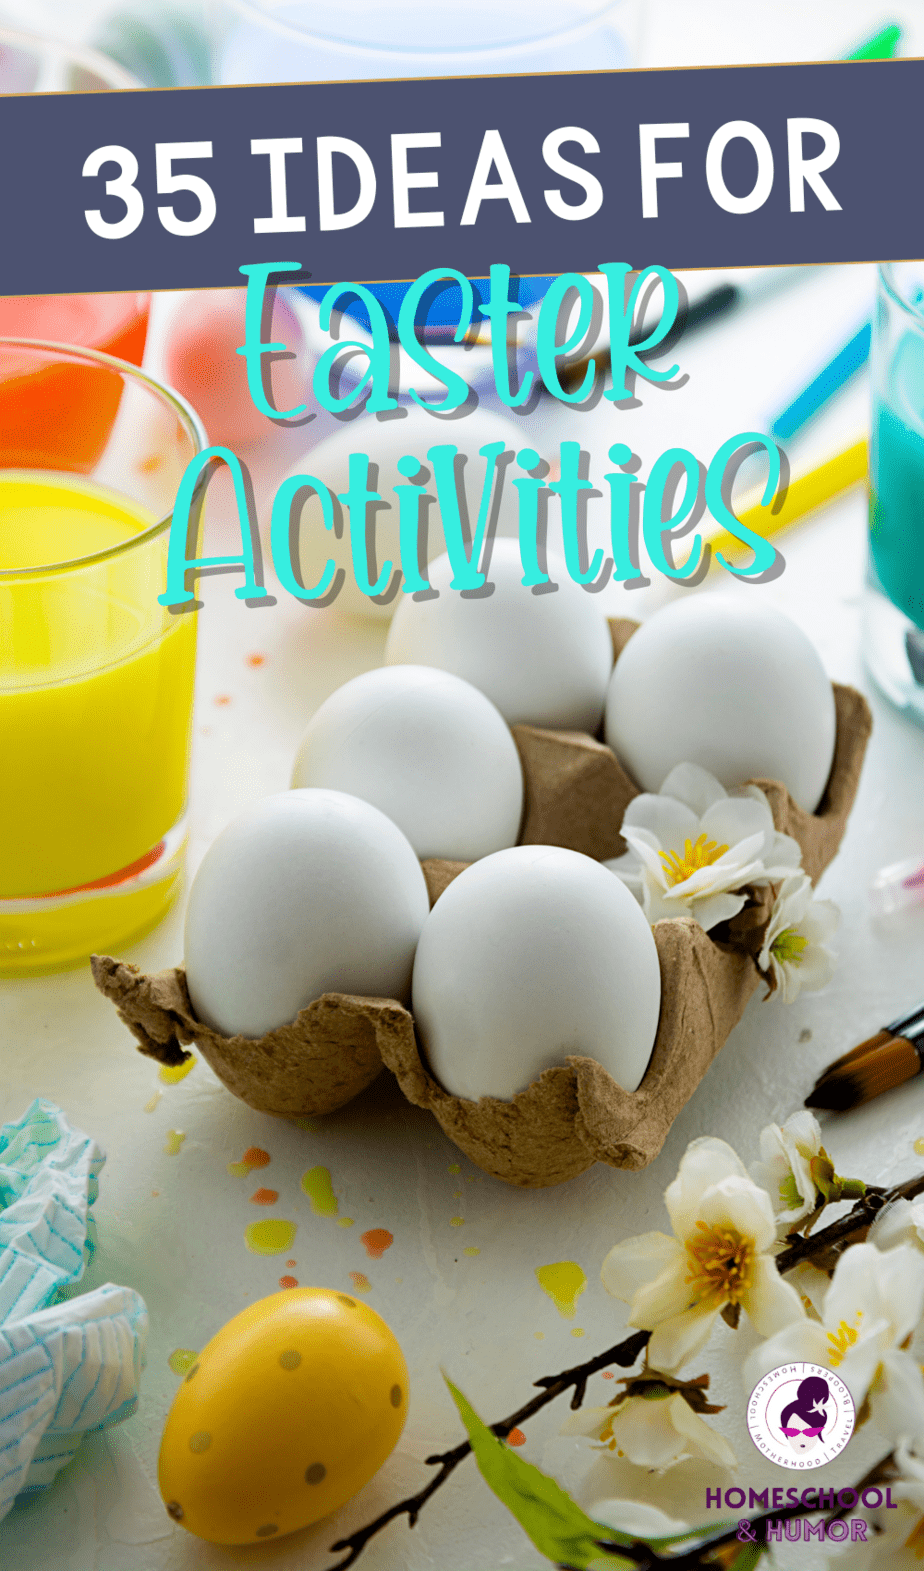 35 Ideas for Christian Easter Activities for Kids That Rock!